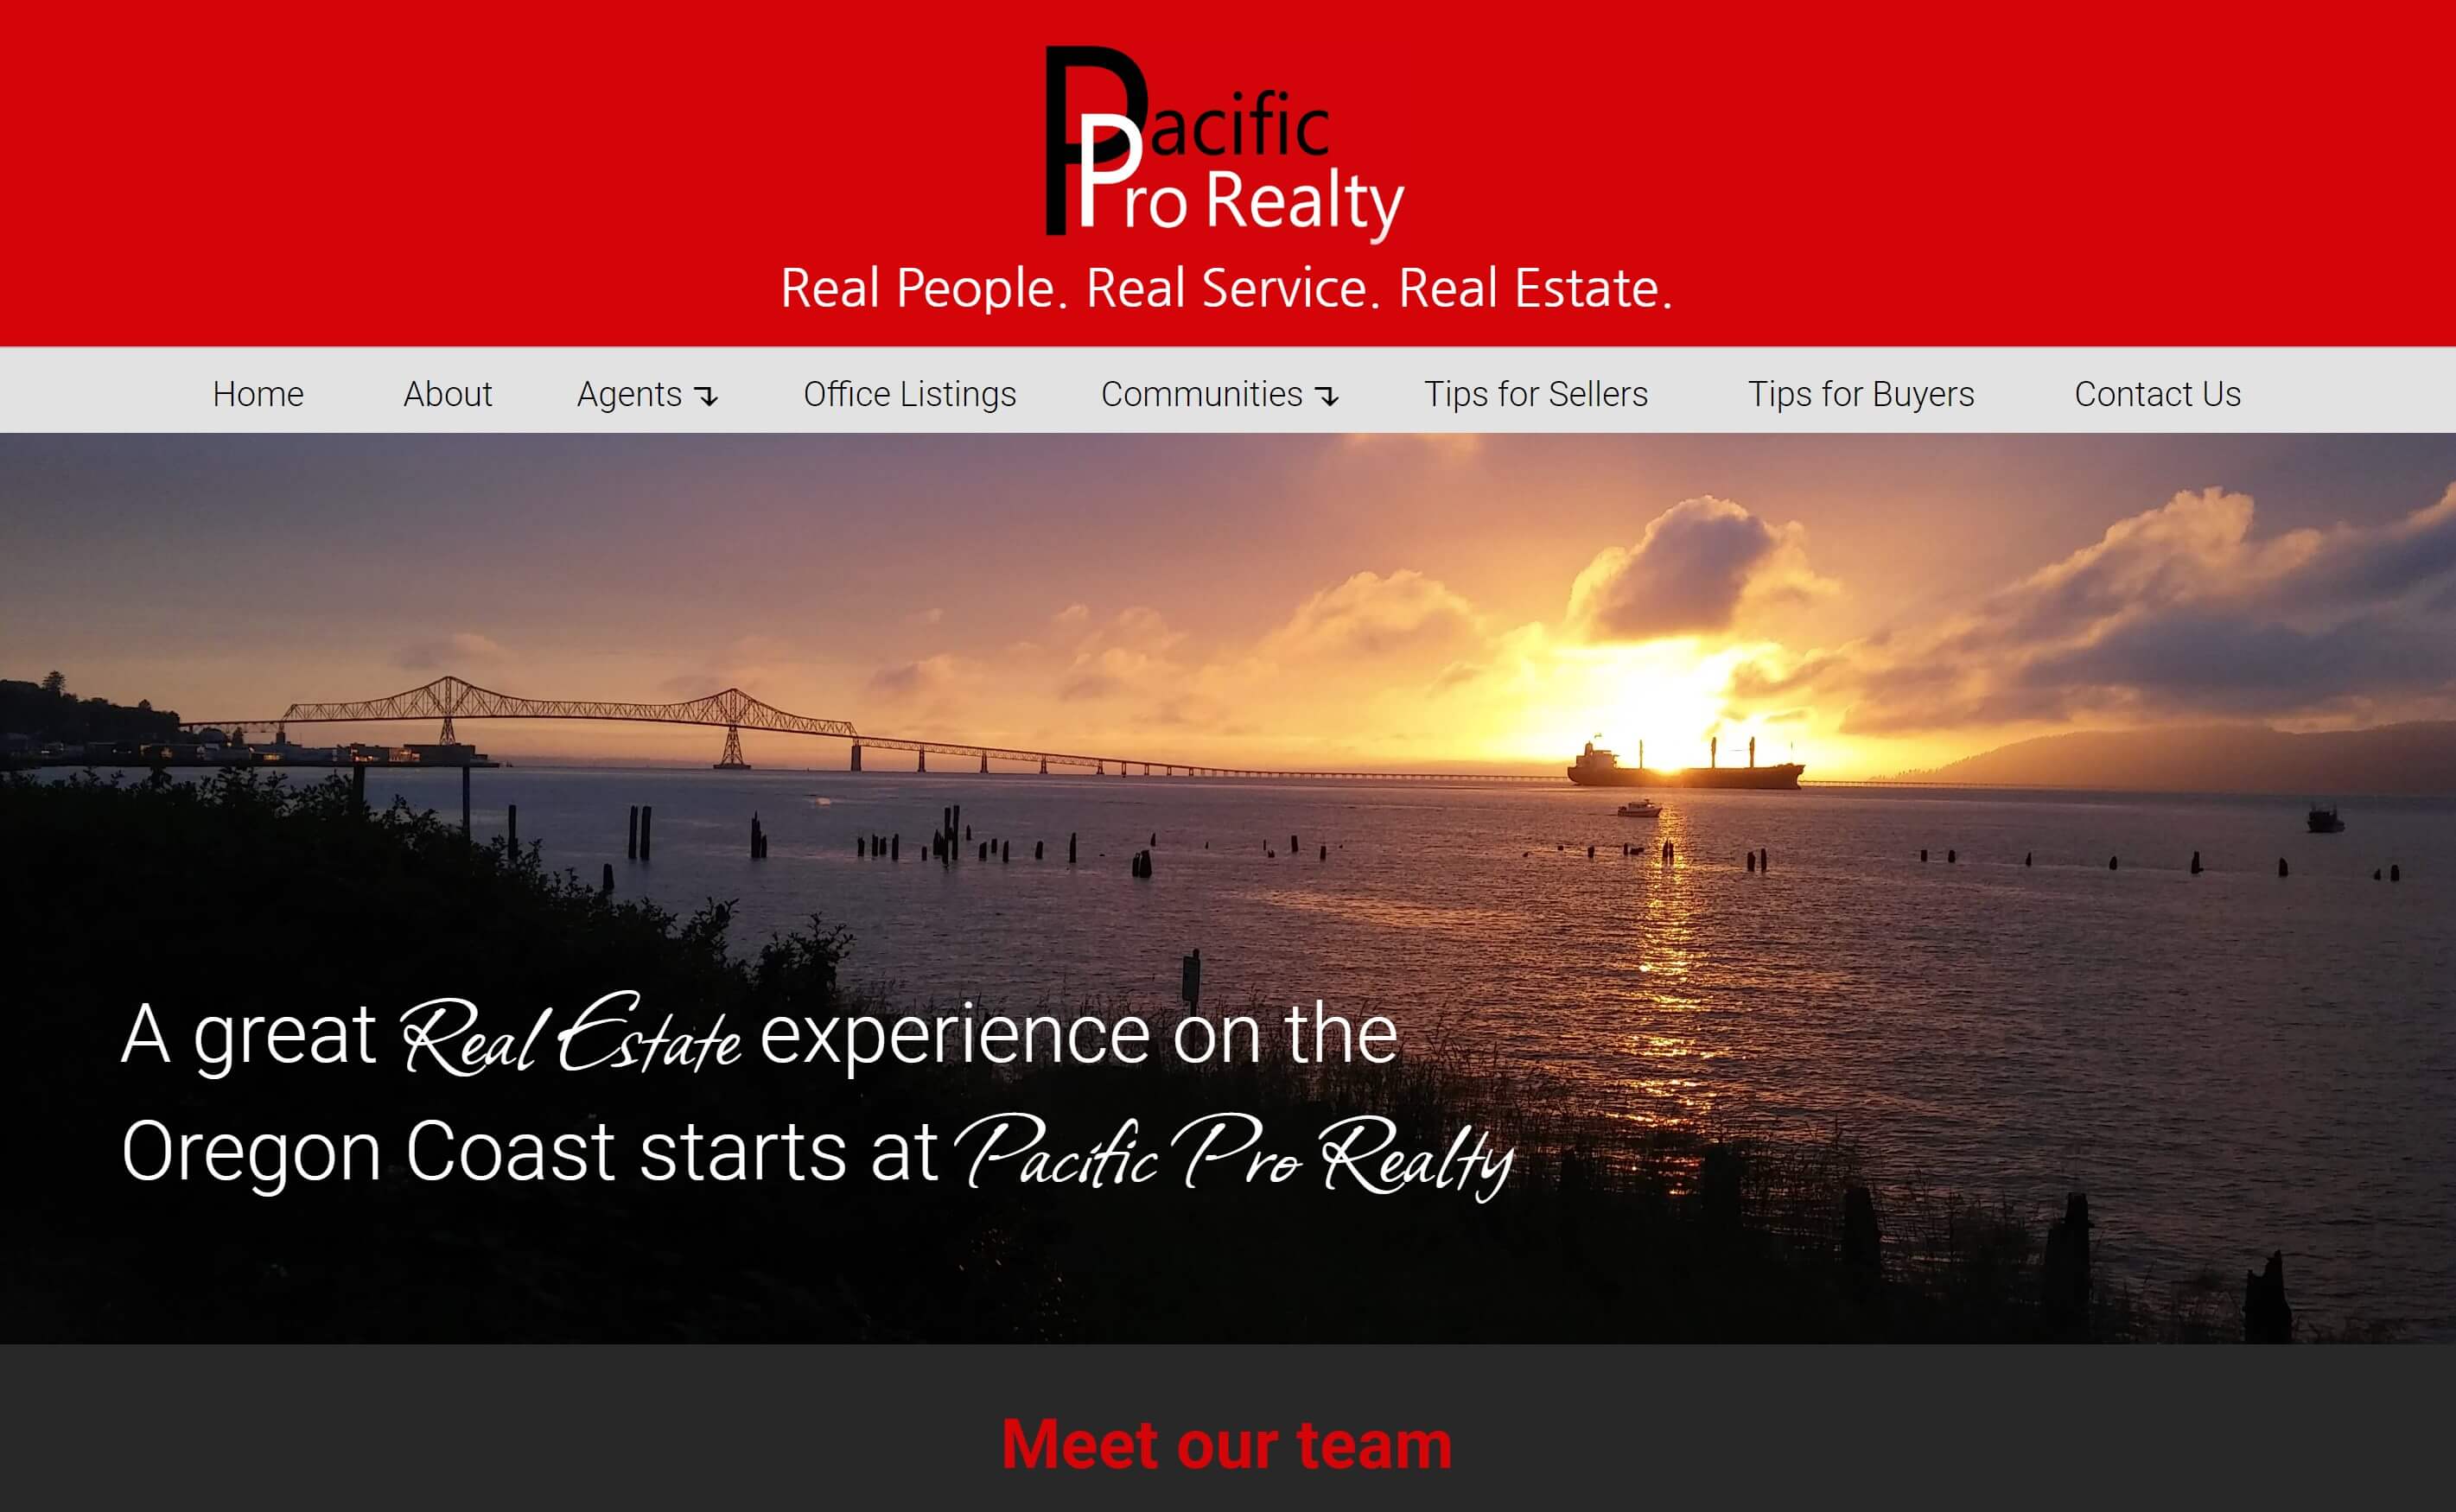 Pacific Pro Realty website homepage.